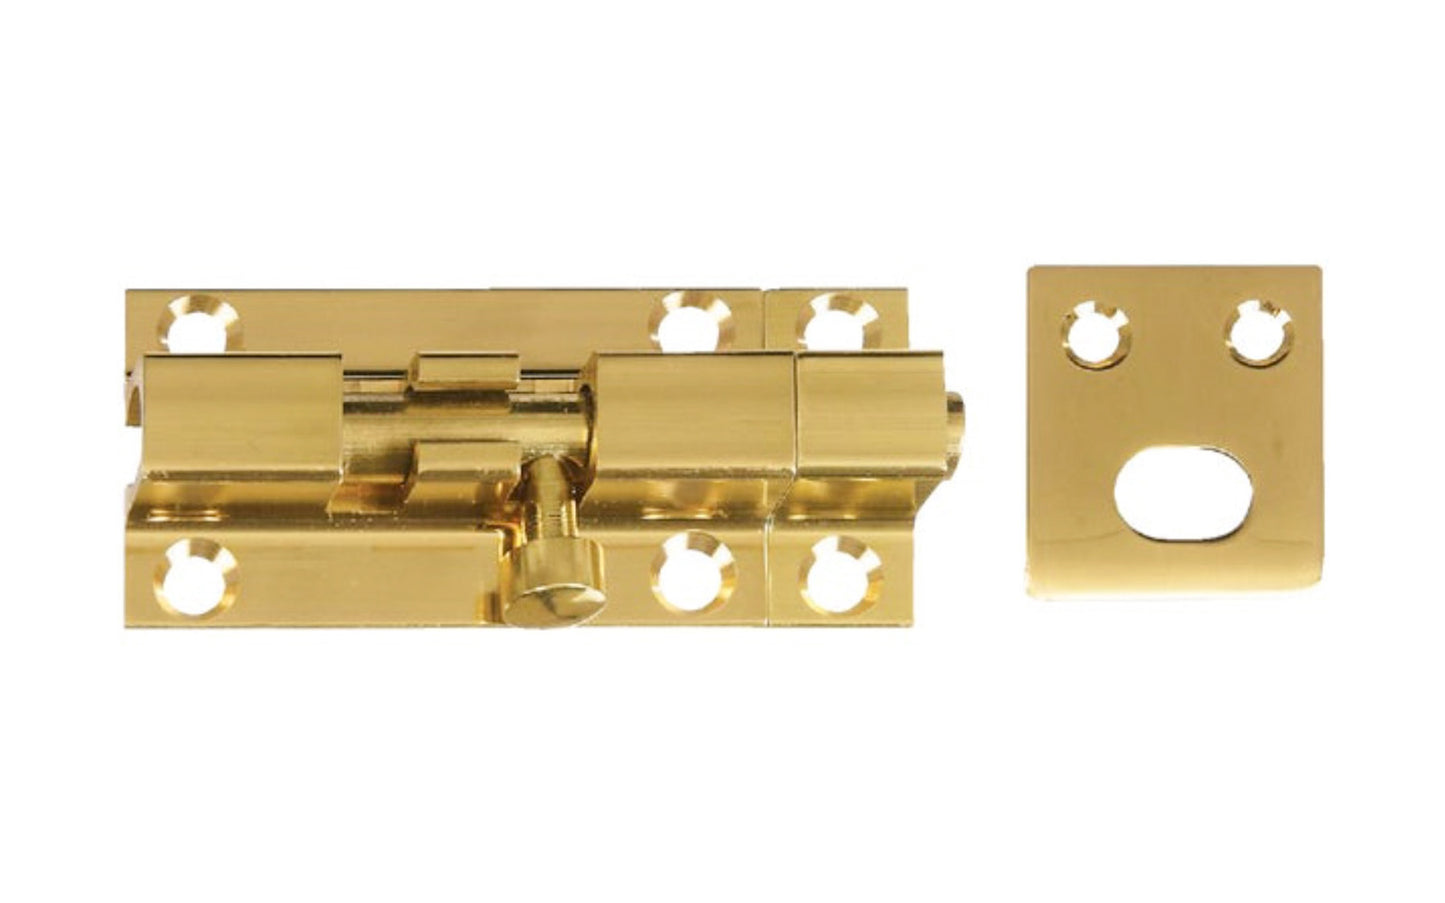 This 2" Solid Brass Barrel Bolt is designed for security applications on lightweight doors, chests, & cabinets. Use on vertical, horizontal, left or right hand applications. Lacquered finish. Includes six solid brass phillips screws. 2-1/4" width x 1-1/4" height. National Hardware Model No. N216-002. 038613216006